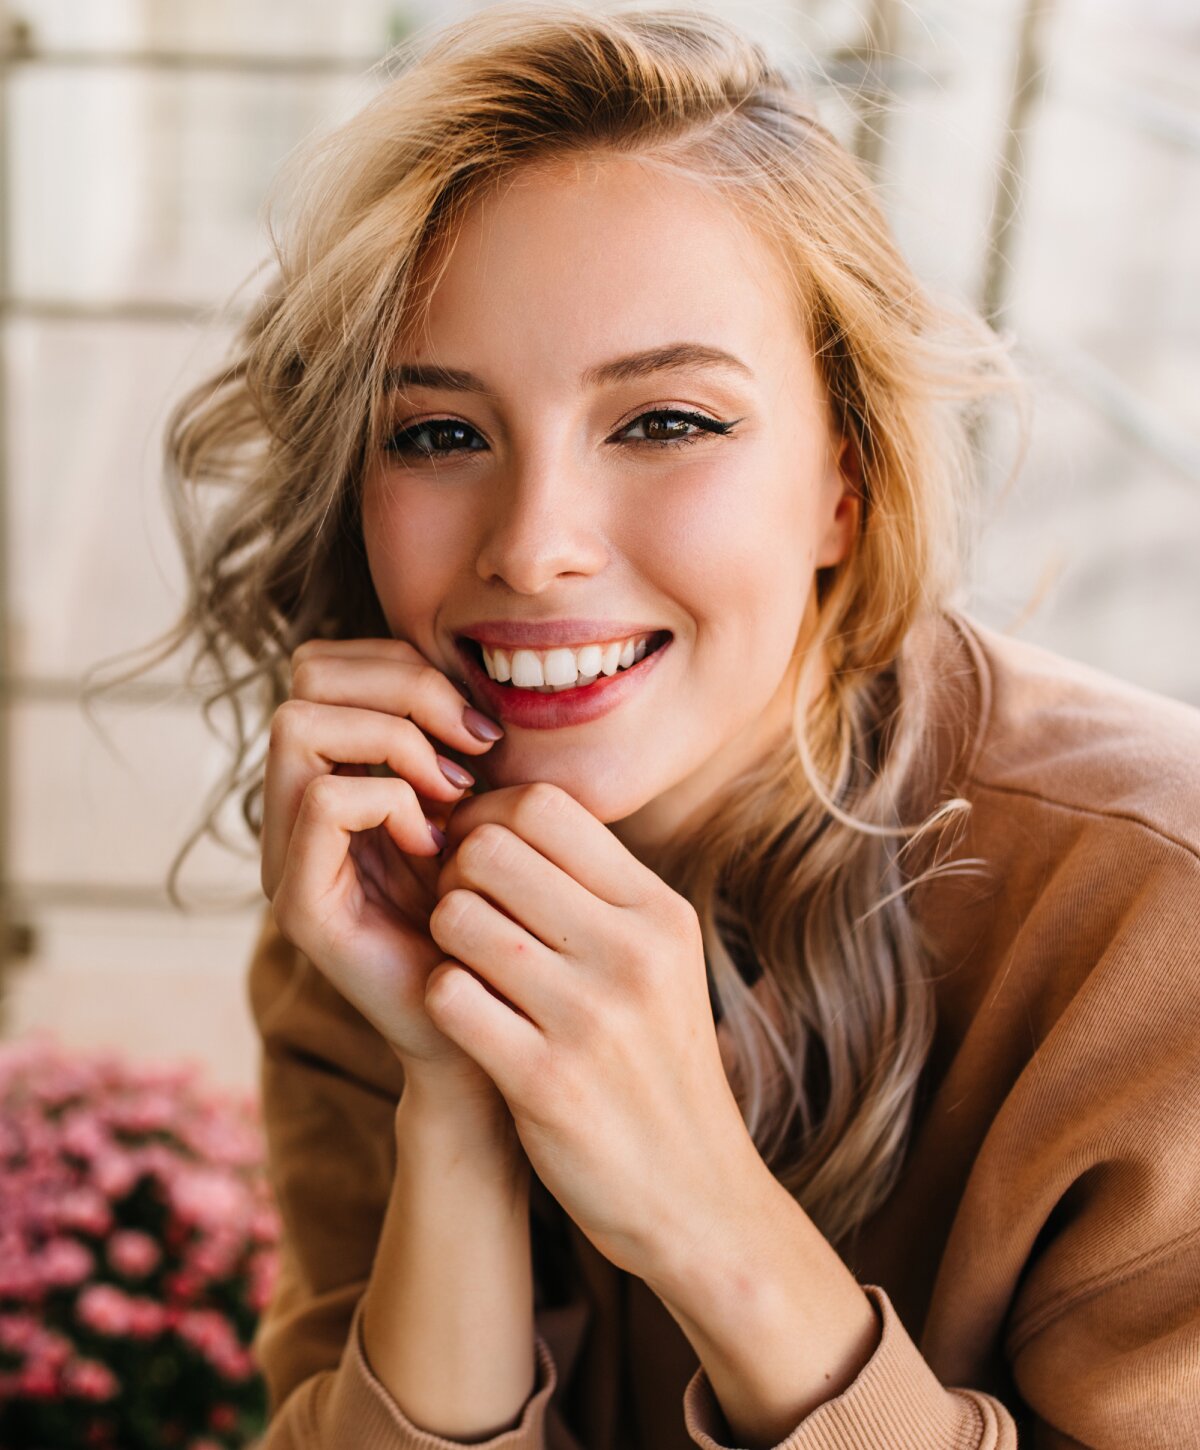 Nashville non-surgical rhinoplasty model with blonde hair smiling